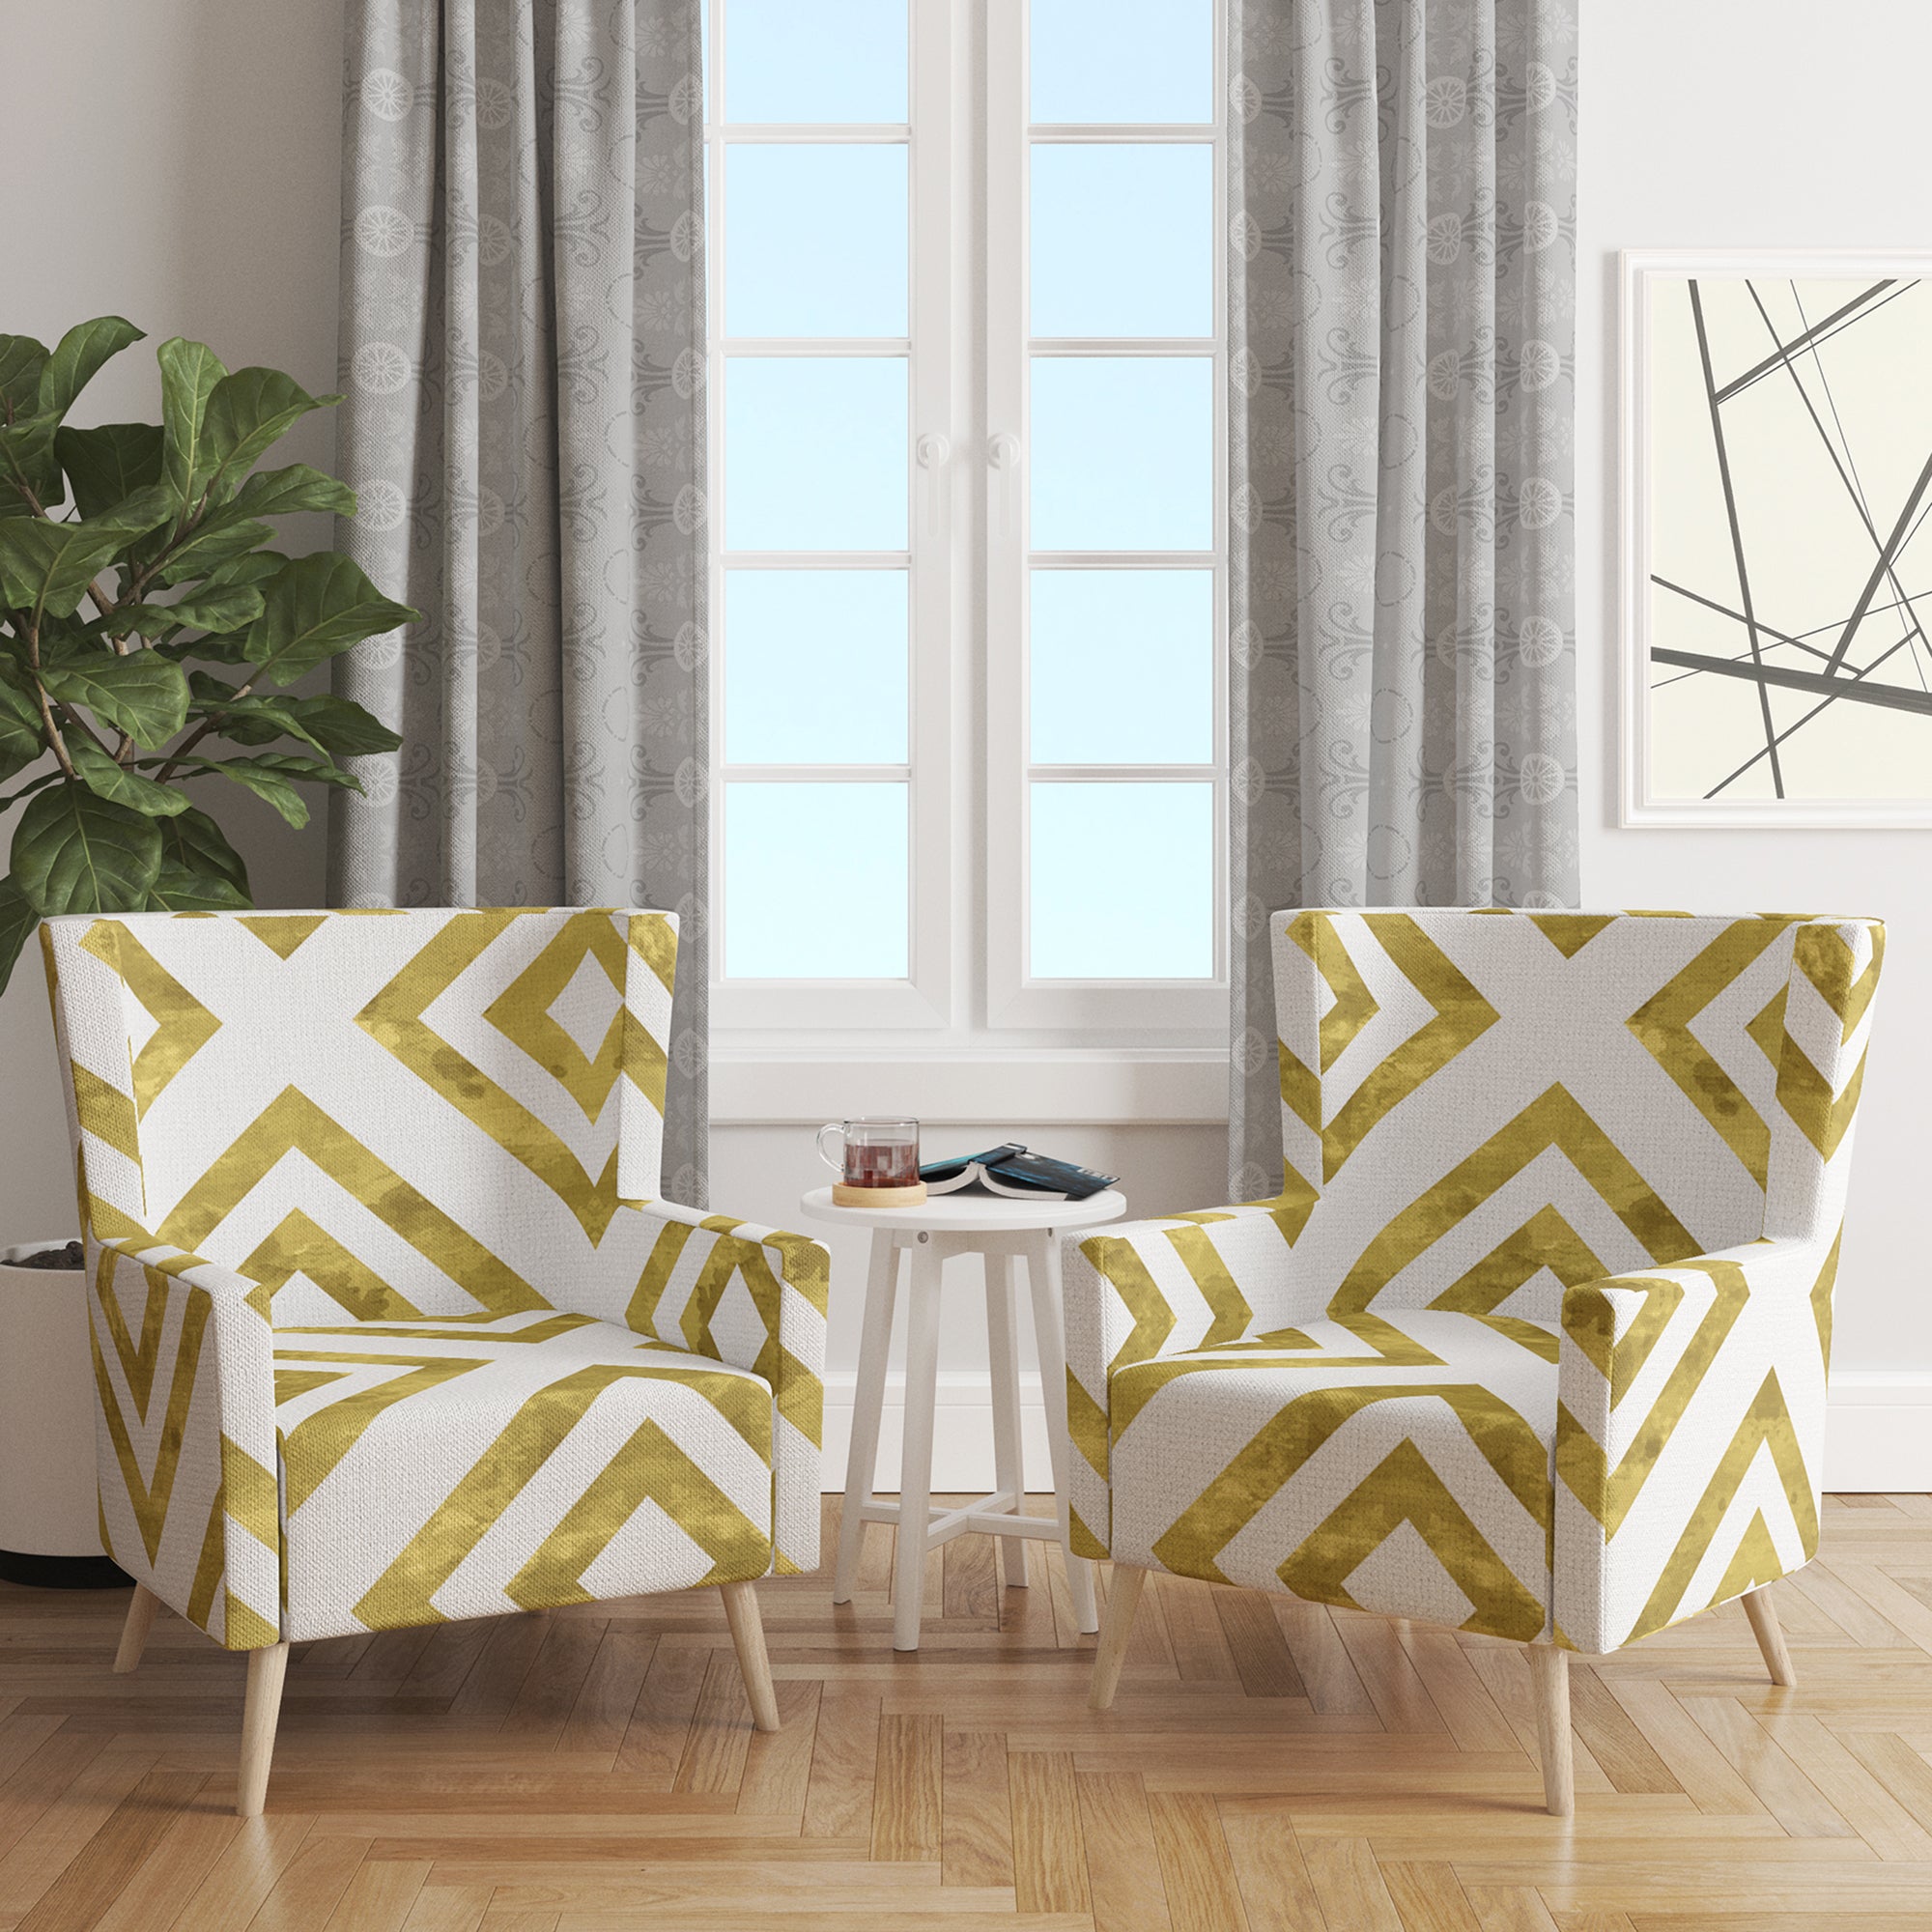 Designart 'White and Gold Pattern' Mid-Century Accent Chair